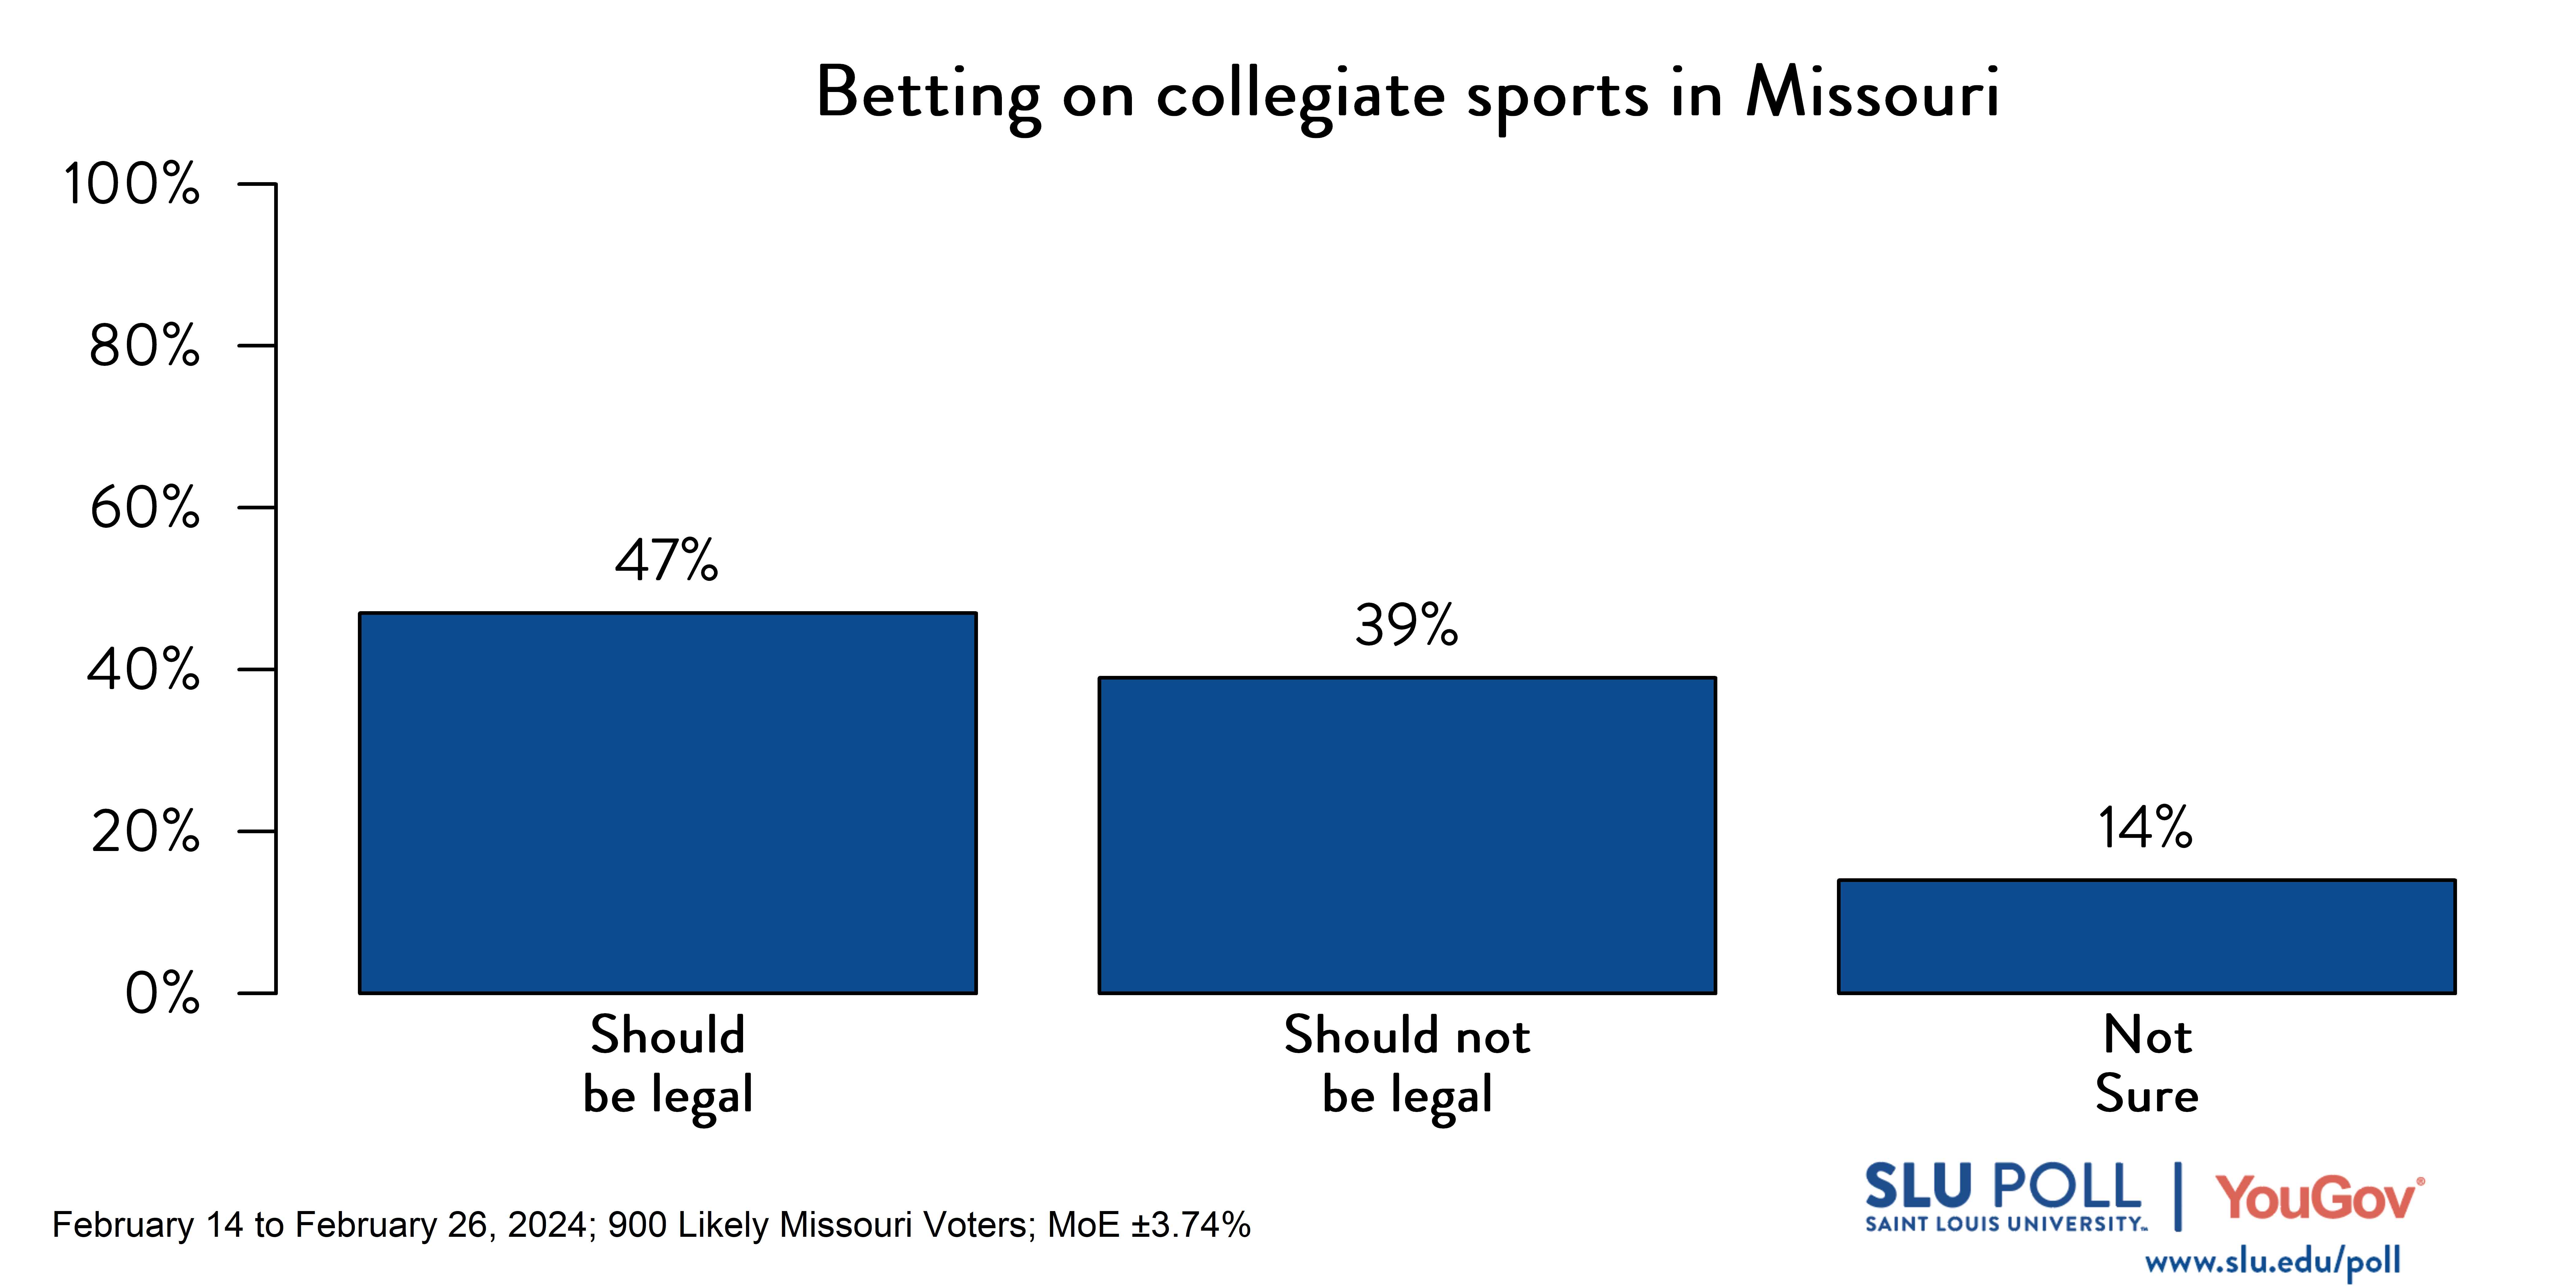 Bar graph of SLU/YouGov Poll results for collegiate sports betting question. Results in comments